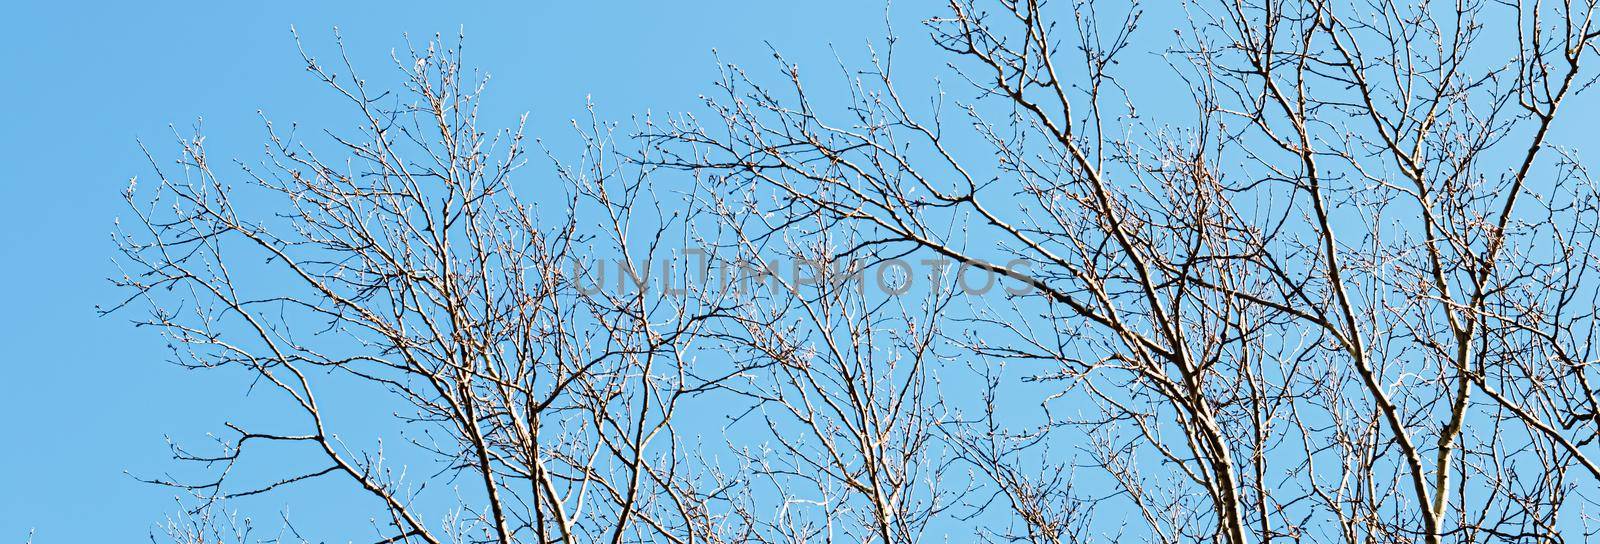 Tree and blue sky in early spring or autumn, nature background by Anneleven